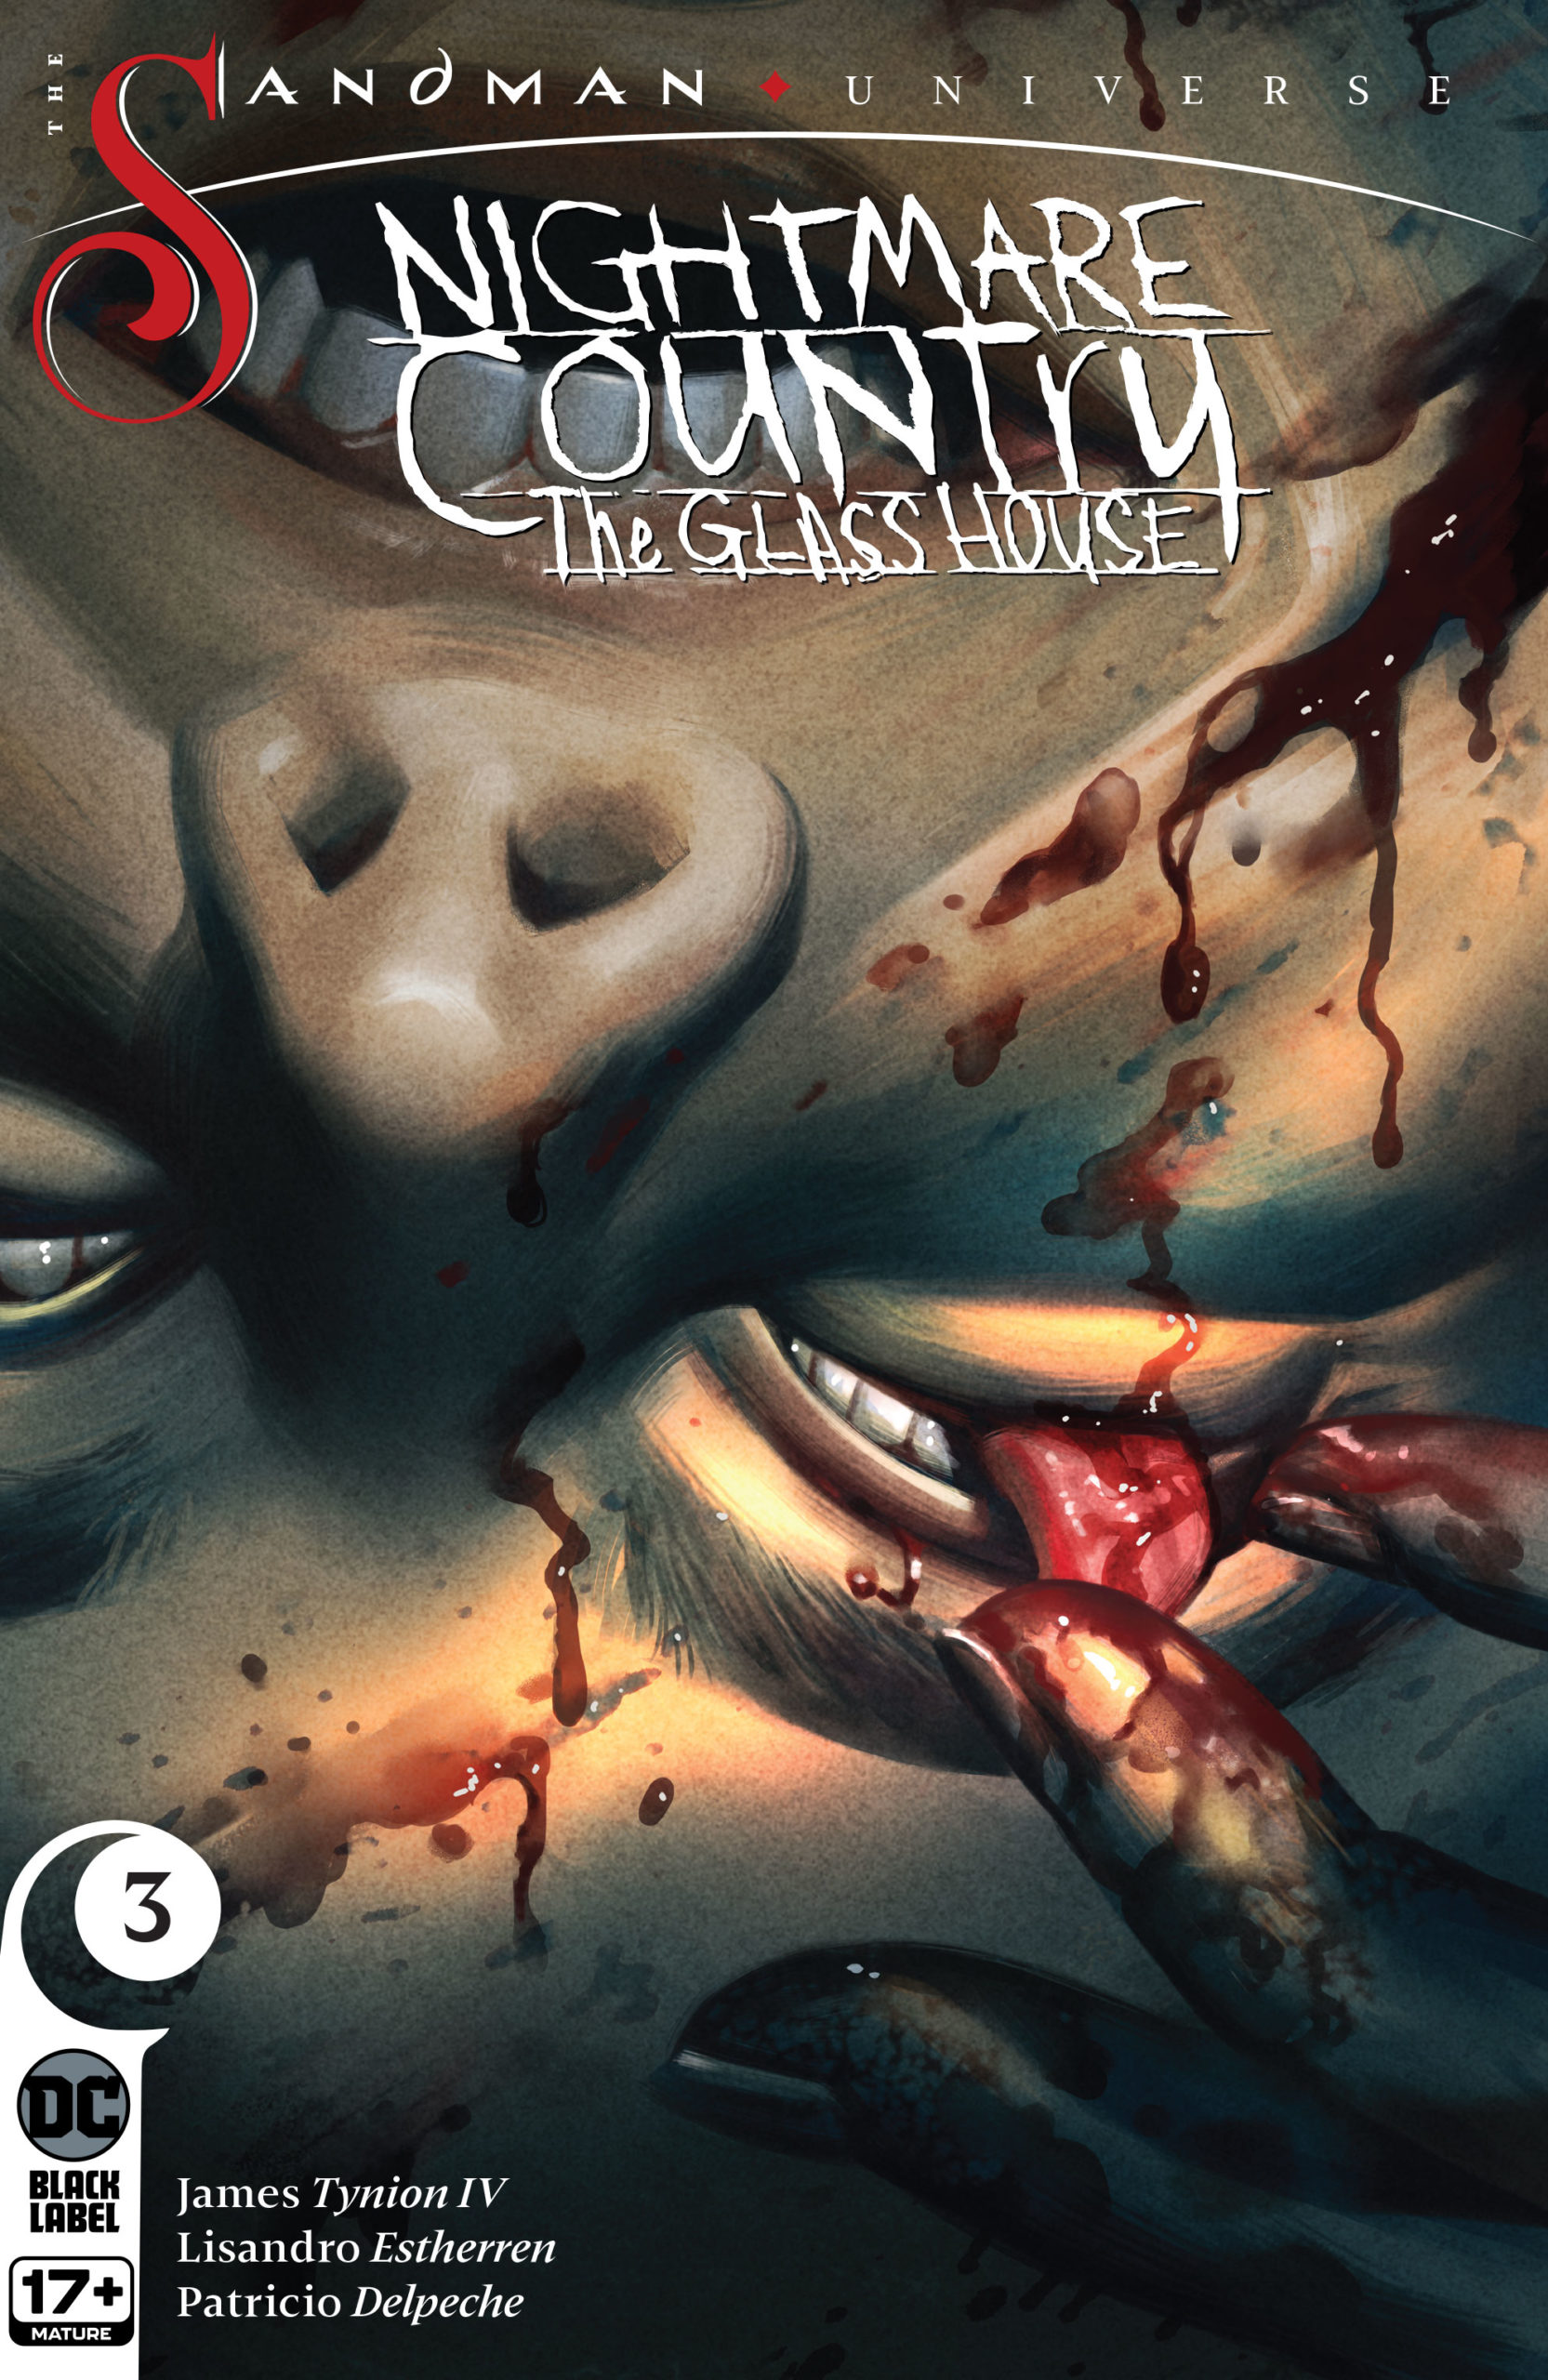 The Sandman Universe Nightmare Country: The Glass House #3